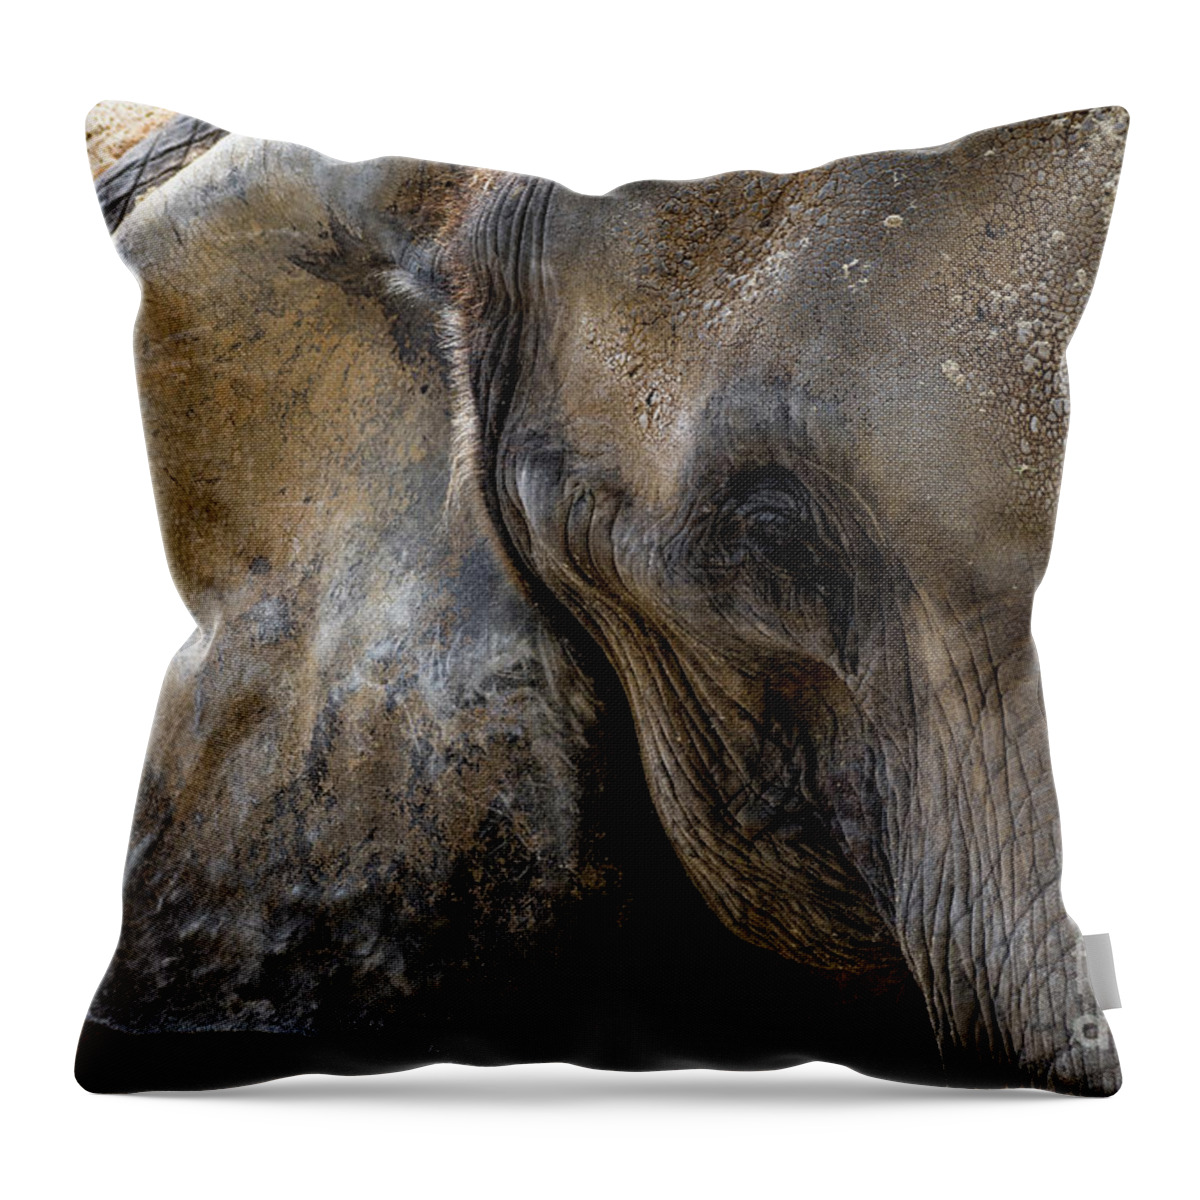 Adult Throw Pillow featuring the photograph Head Of An Old African Elephant With Wrinkled Skin by Andreas Berthold